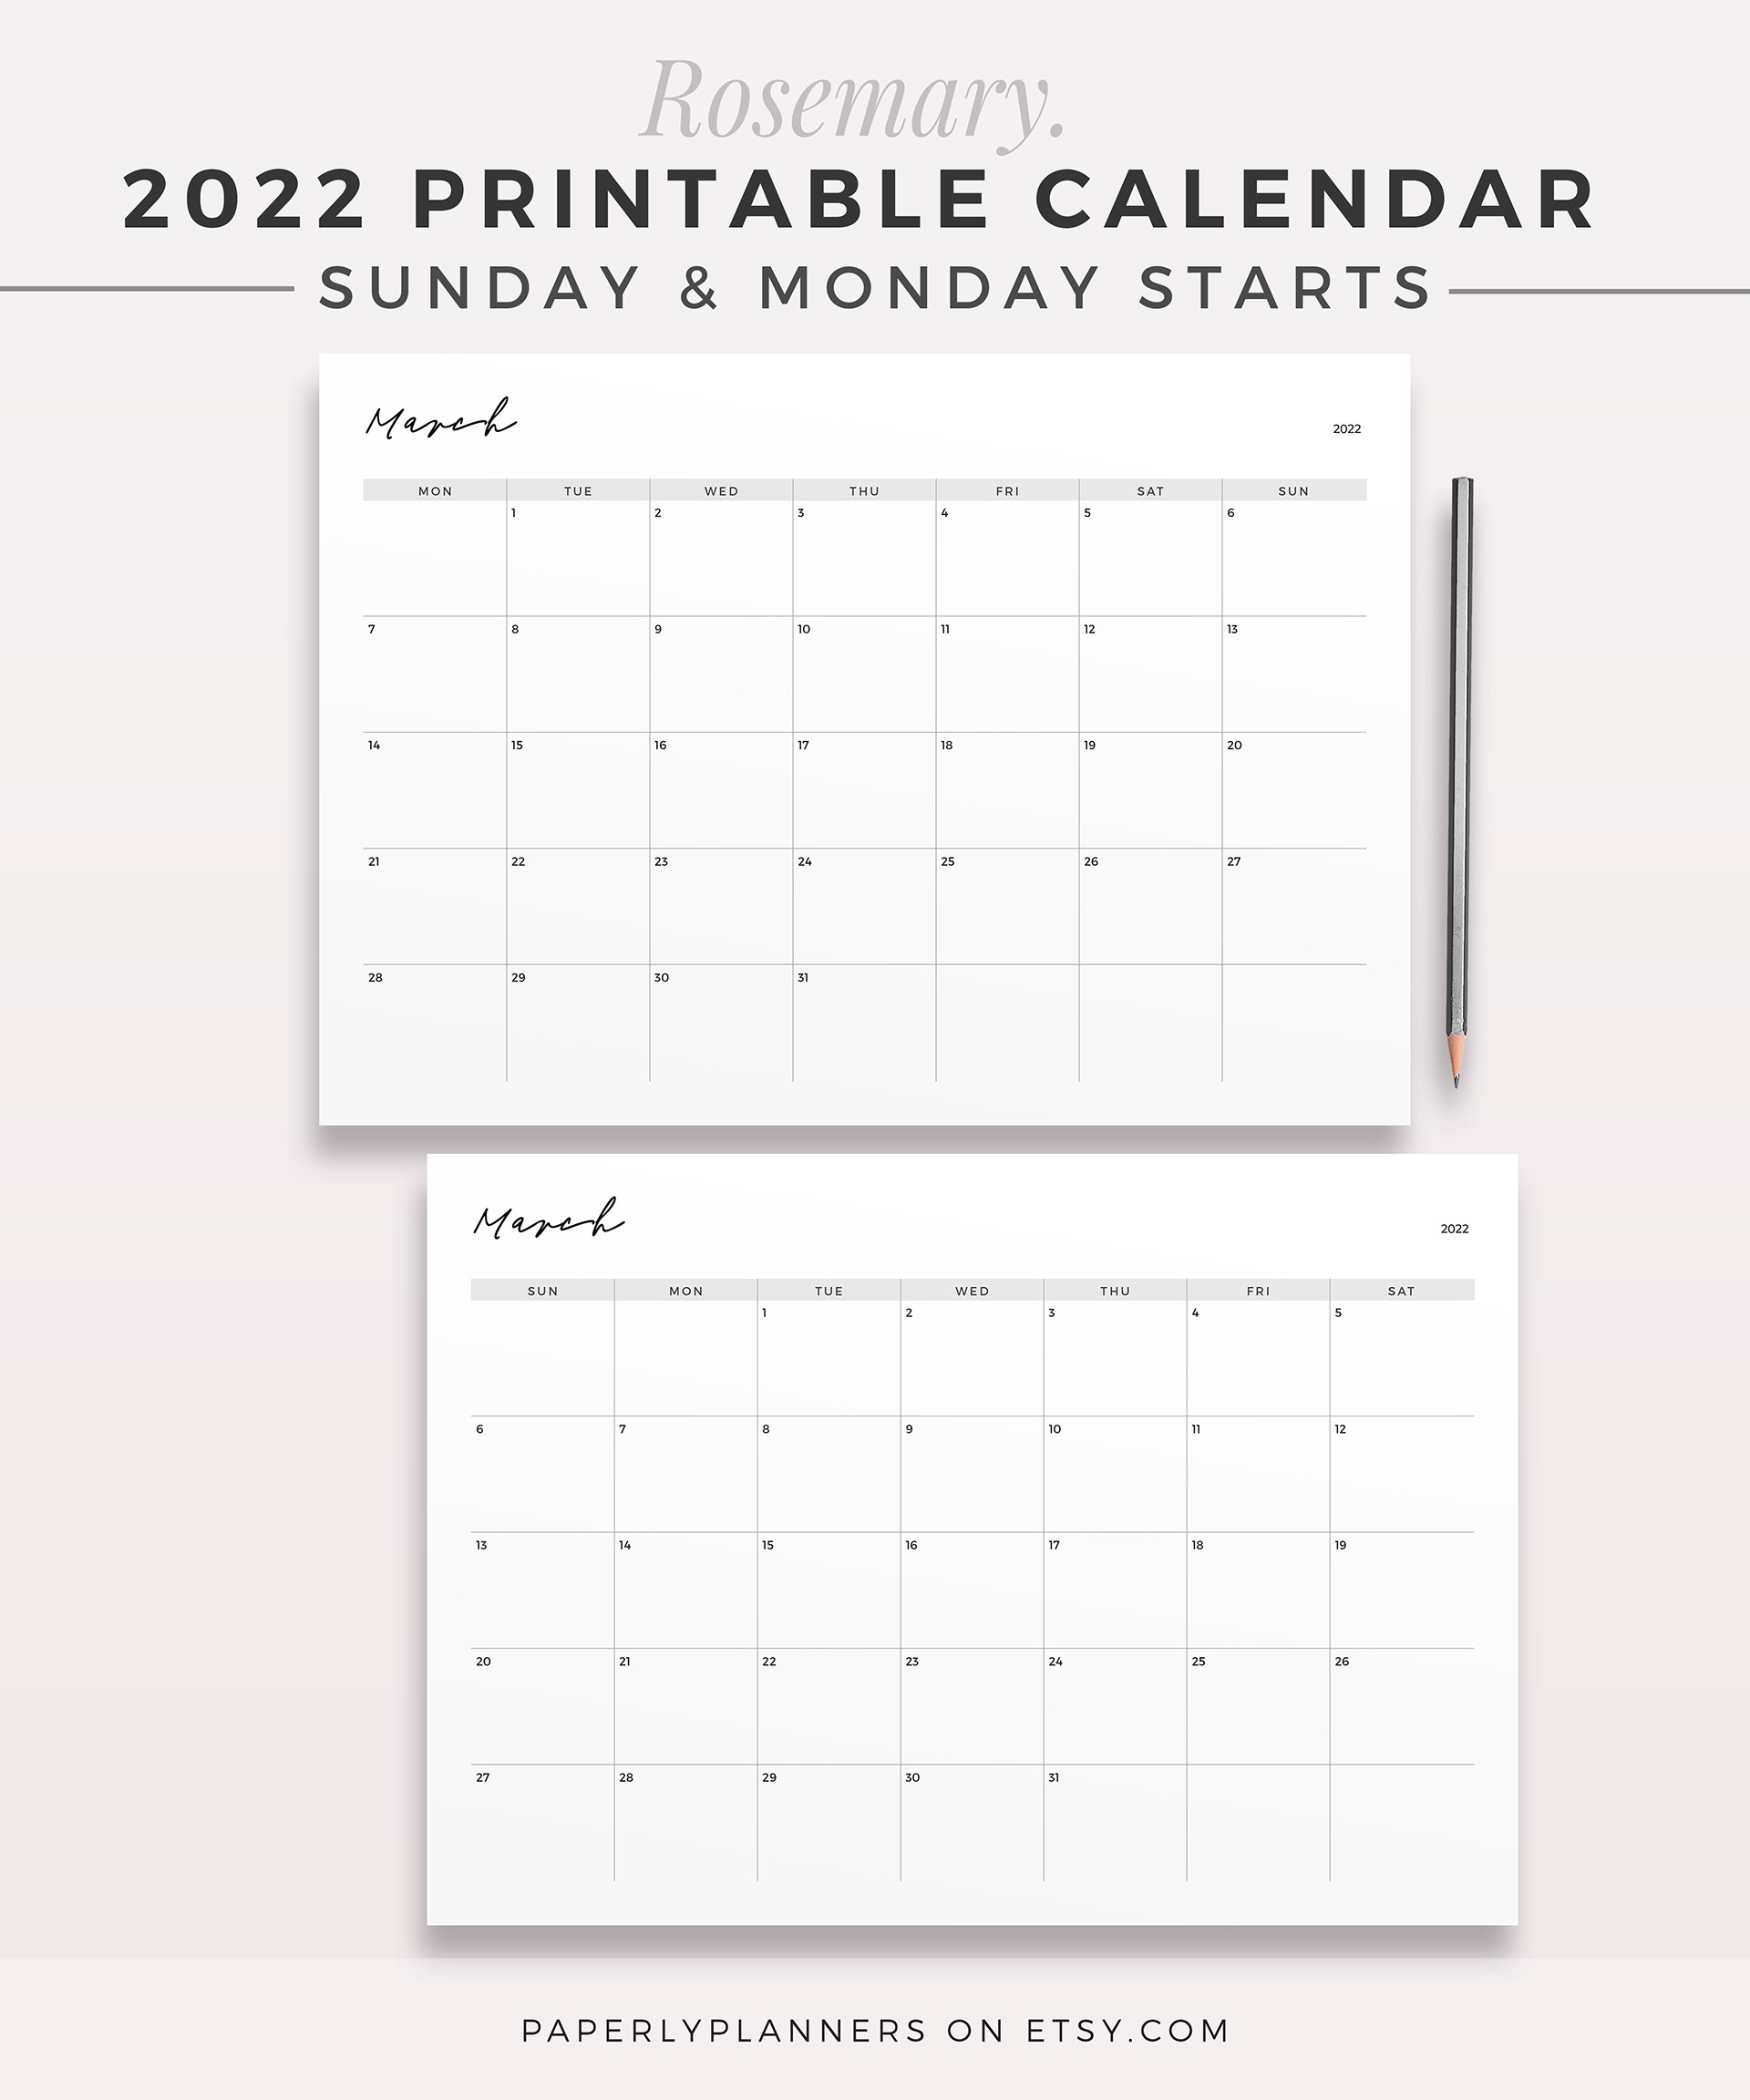 Paperly Planners - Beautiful, Productive. - 2022 ROSEMARY Calendar